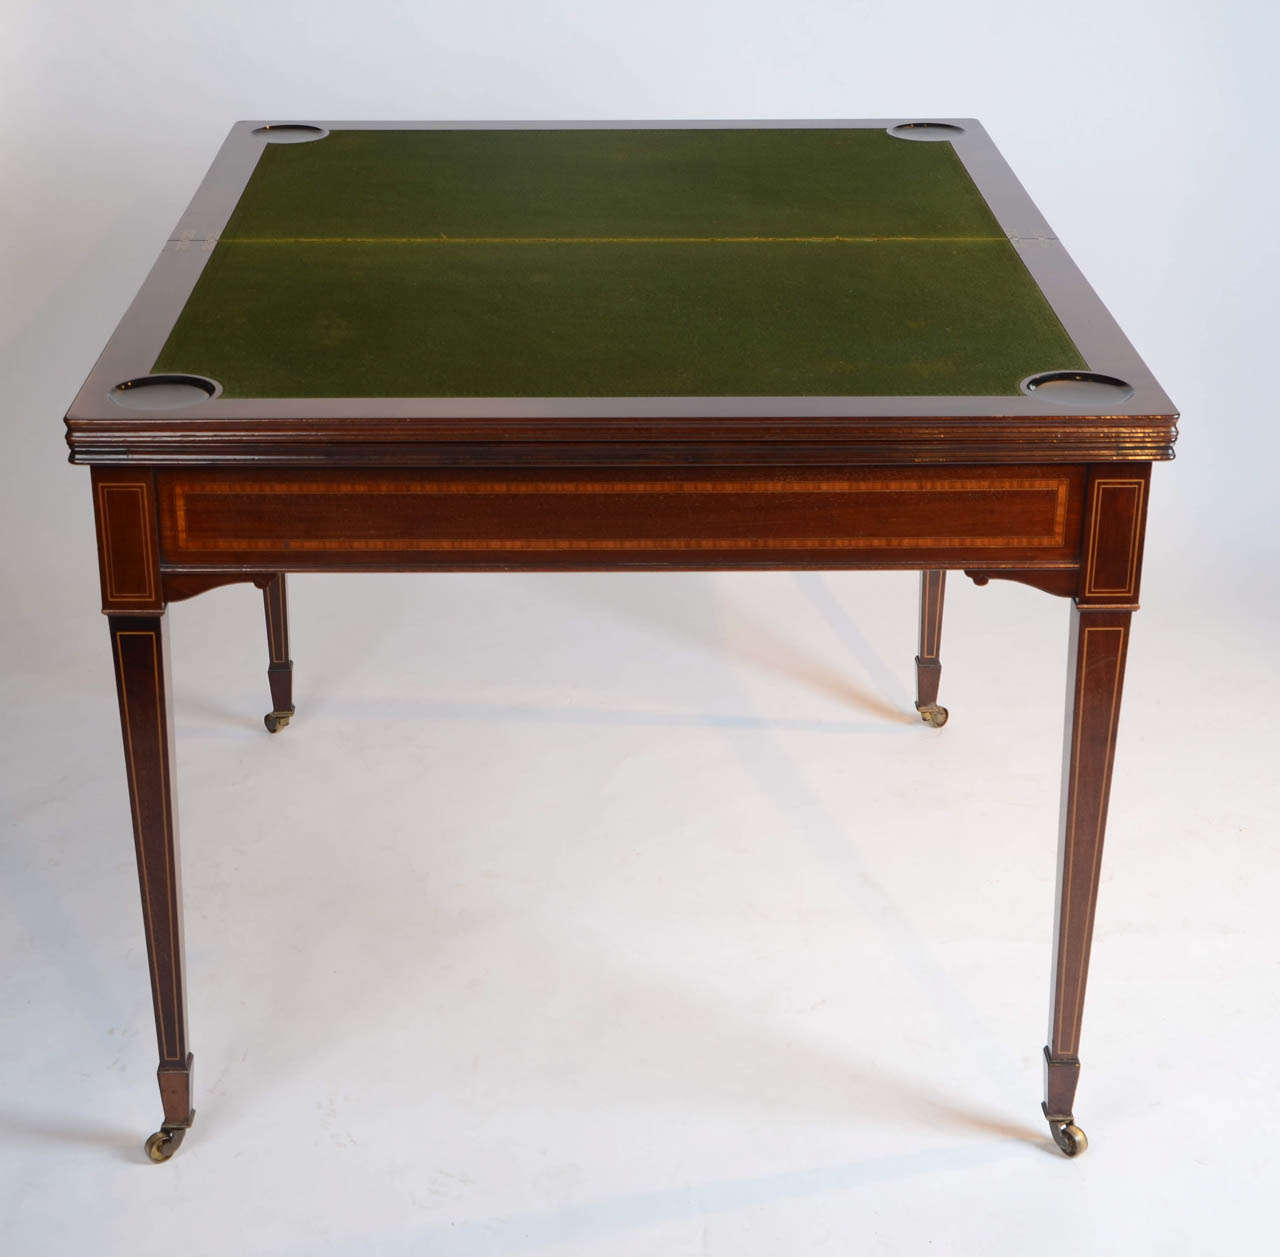 20th Century The Edwardian King's Roulette, Card and Games Table, mahogany c.1908